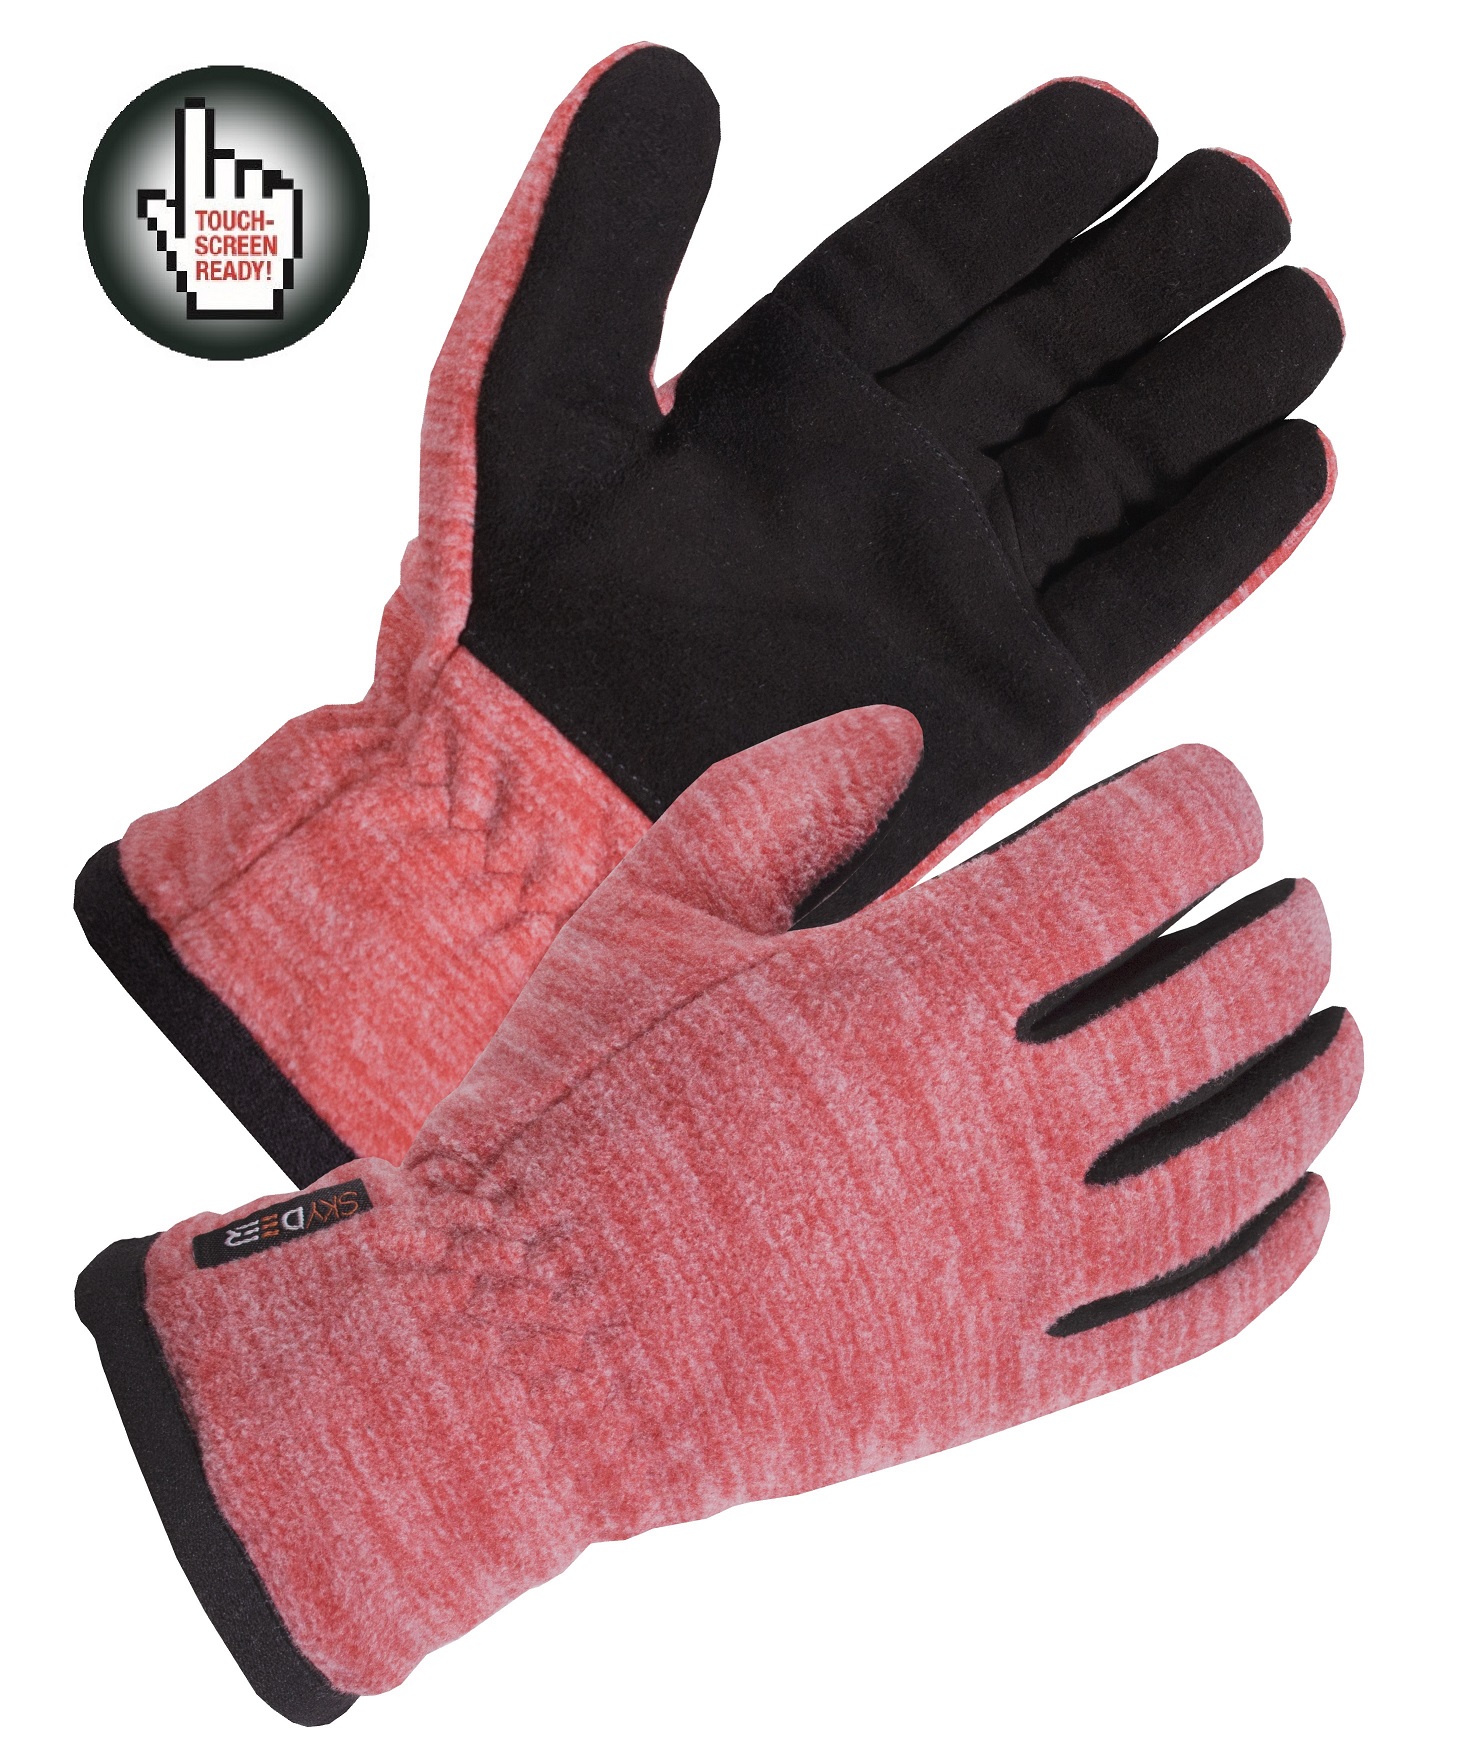 SD8661KW SKYDEER Winter Gloves with Soft Deerskin Suede Leather & Thermal Polar Fleece & Warm 3M Thinsulate Insulation 